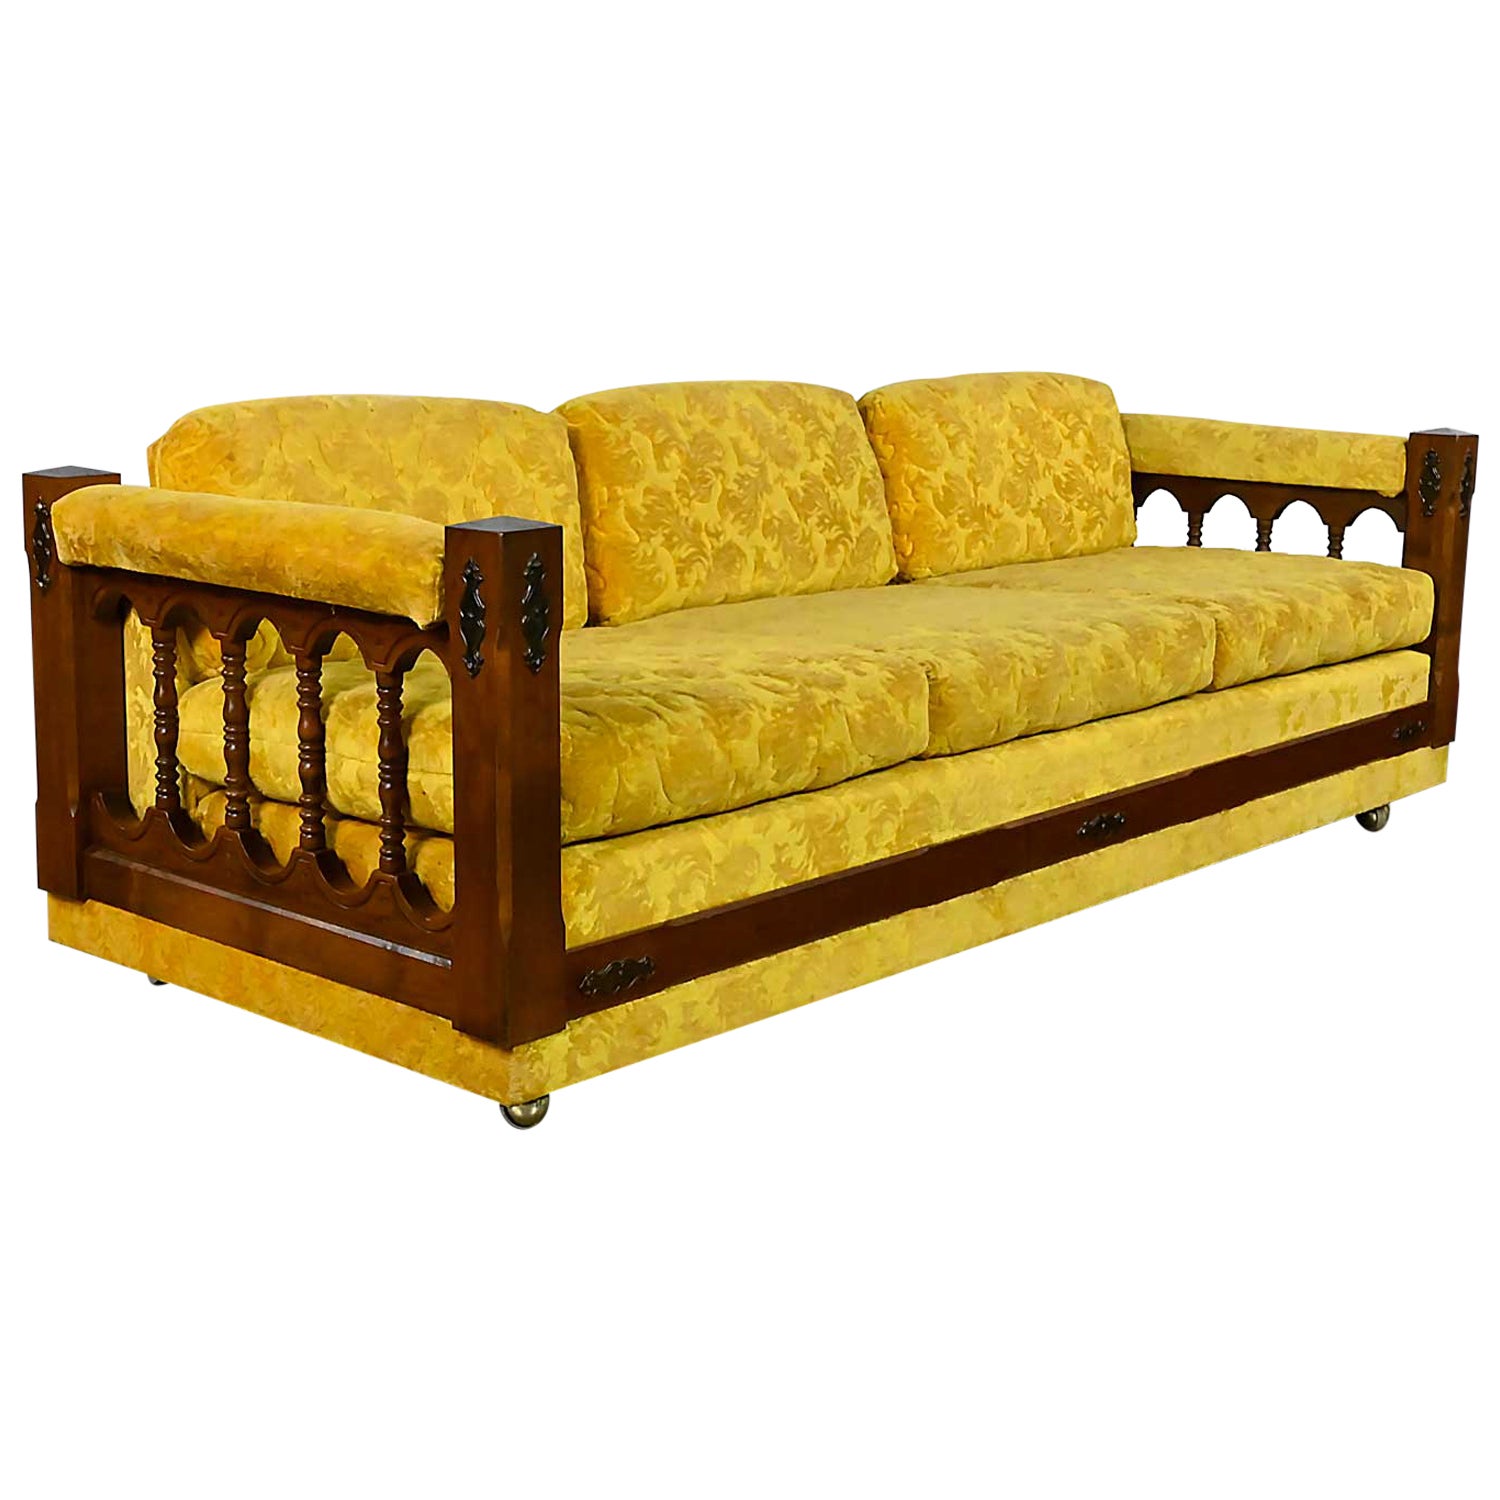 Vintage Spanish Revival Gold Textured Fabric Sofa Turned with Spindle Sides For Sale